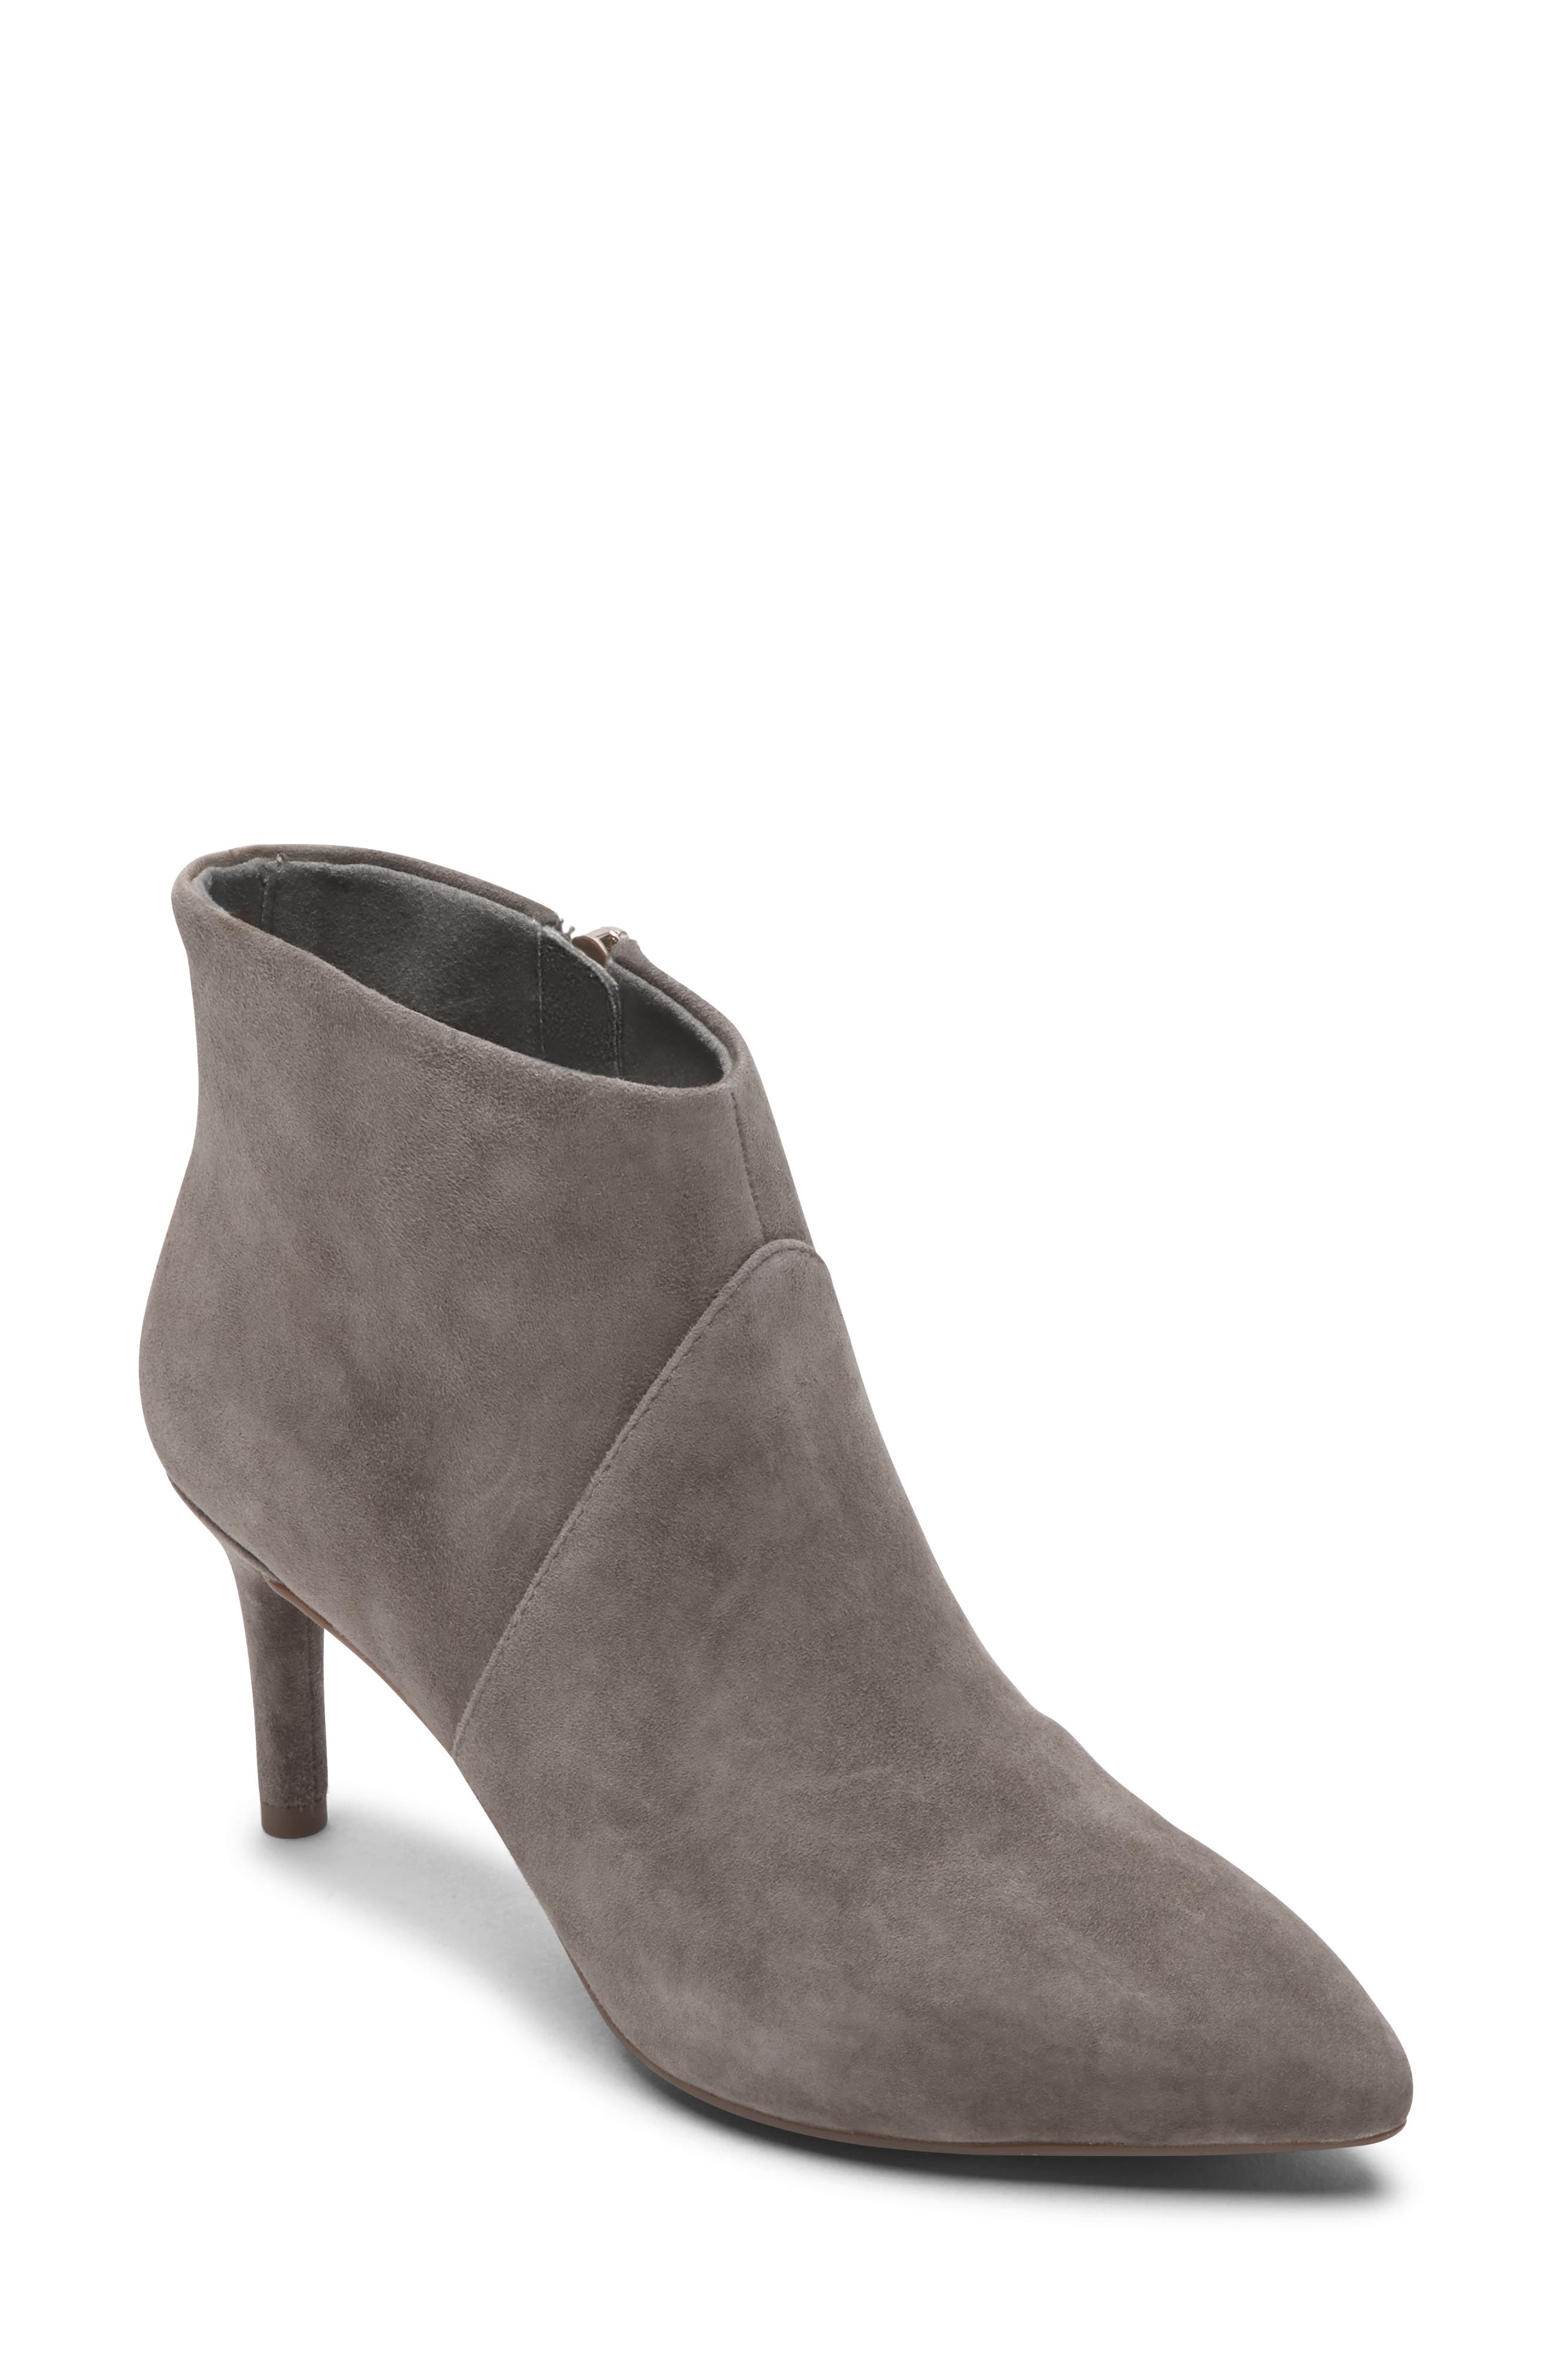 nordstrom taupe booties